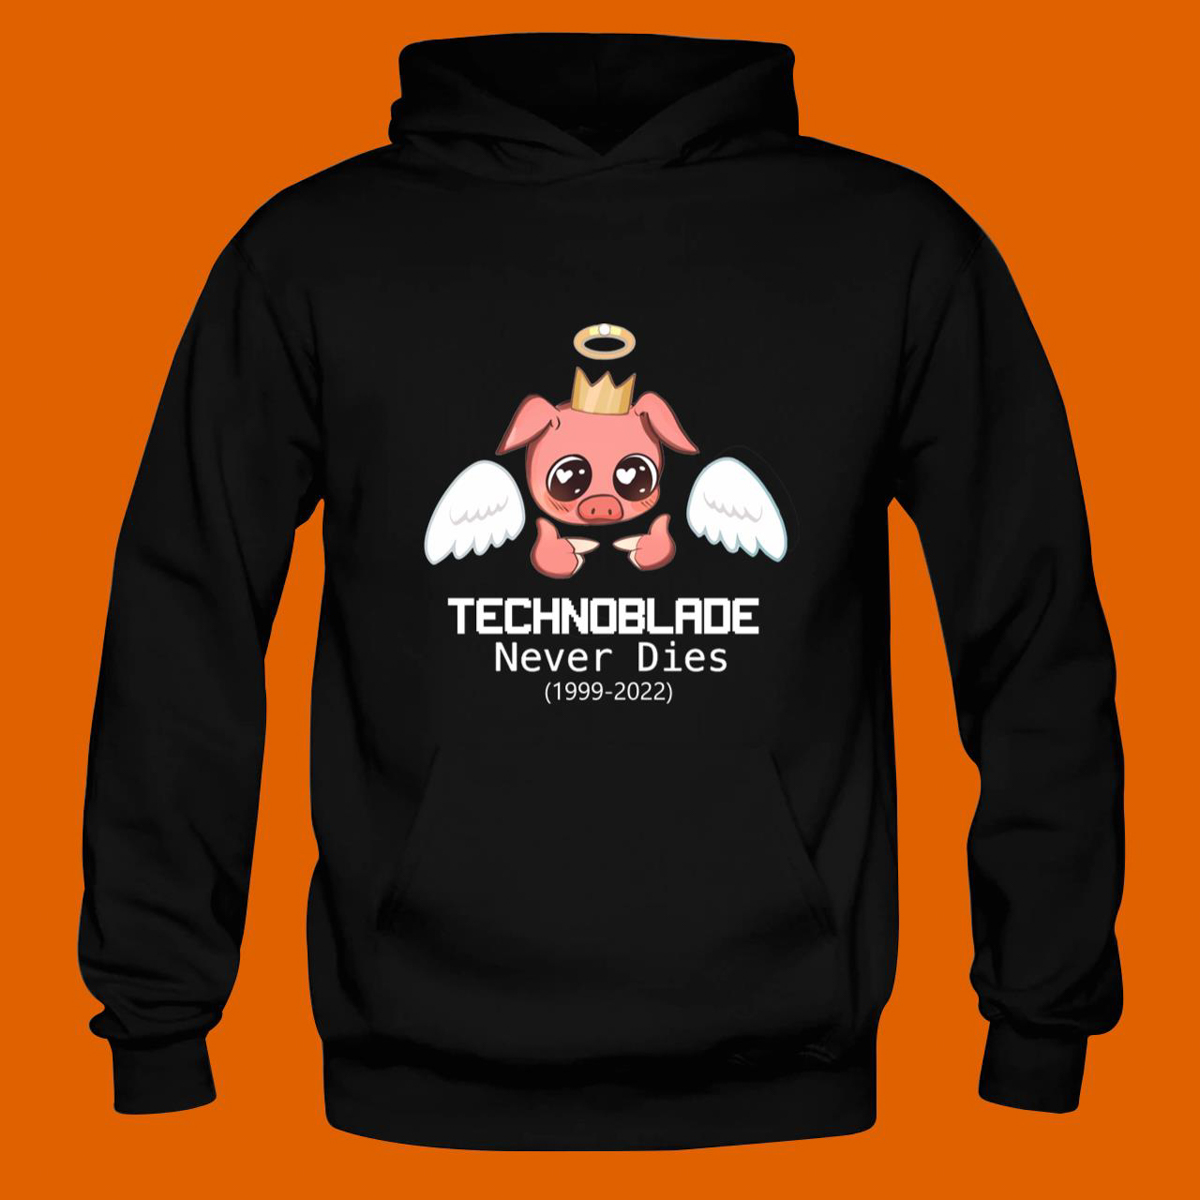 Technoblade Never Dies 1999-2022 Shirts